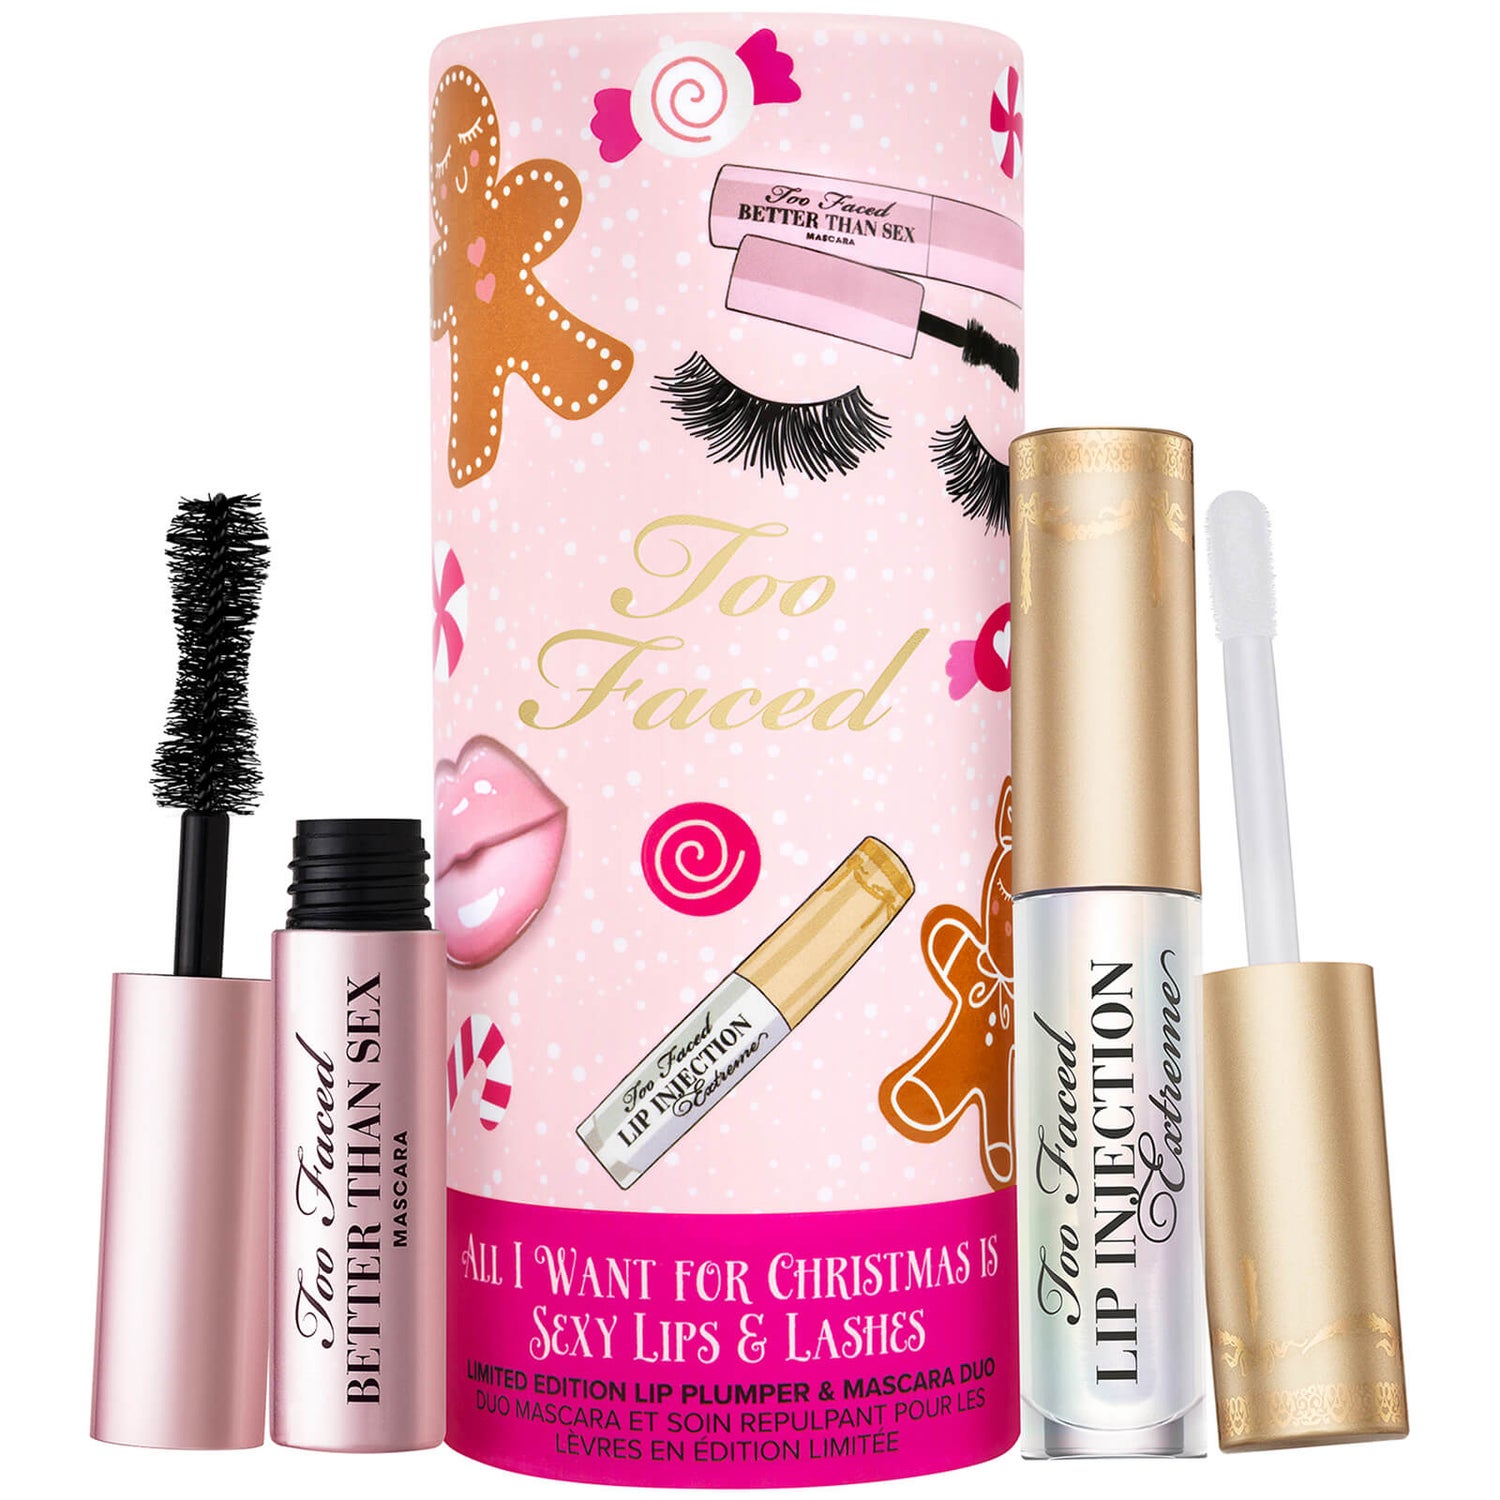 Too Faced Limited Edition All I Want For Christmas are Sexy Lips and Lashes Set